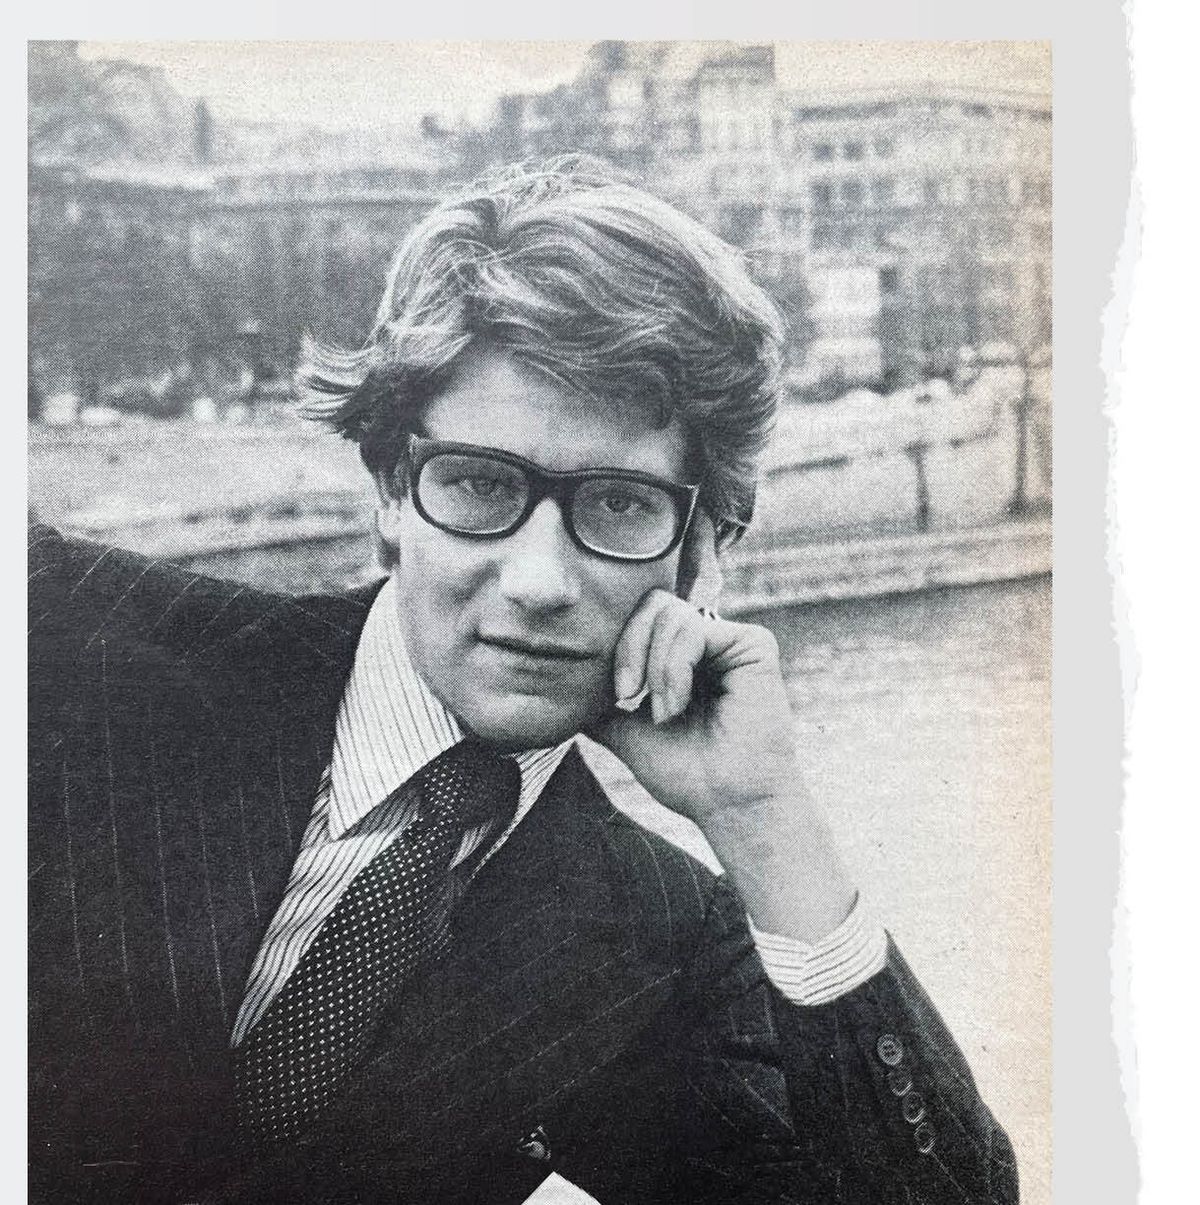 Here Are Yves Saint Laurent's Thoughts on Color in 1977